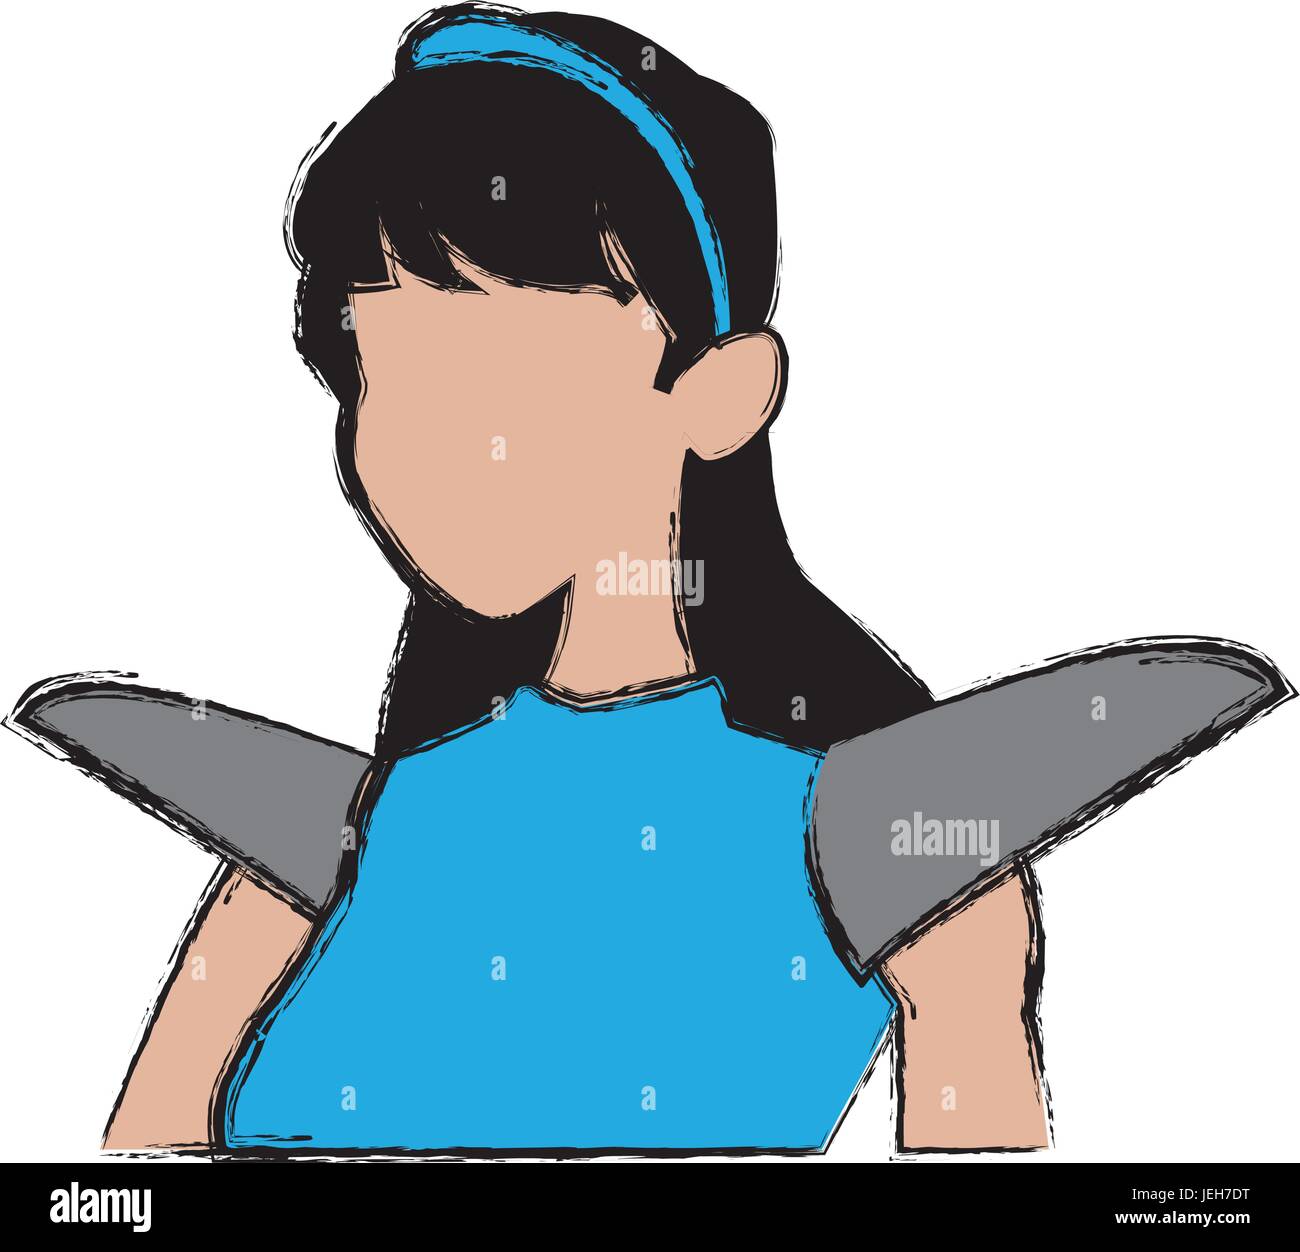 Costume with armor Stock Vector Images - Alamy